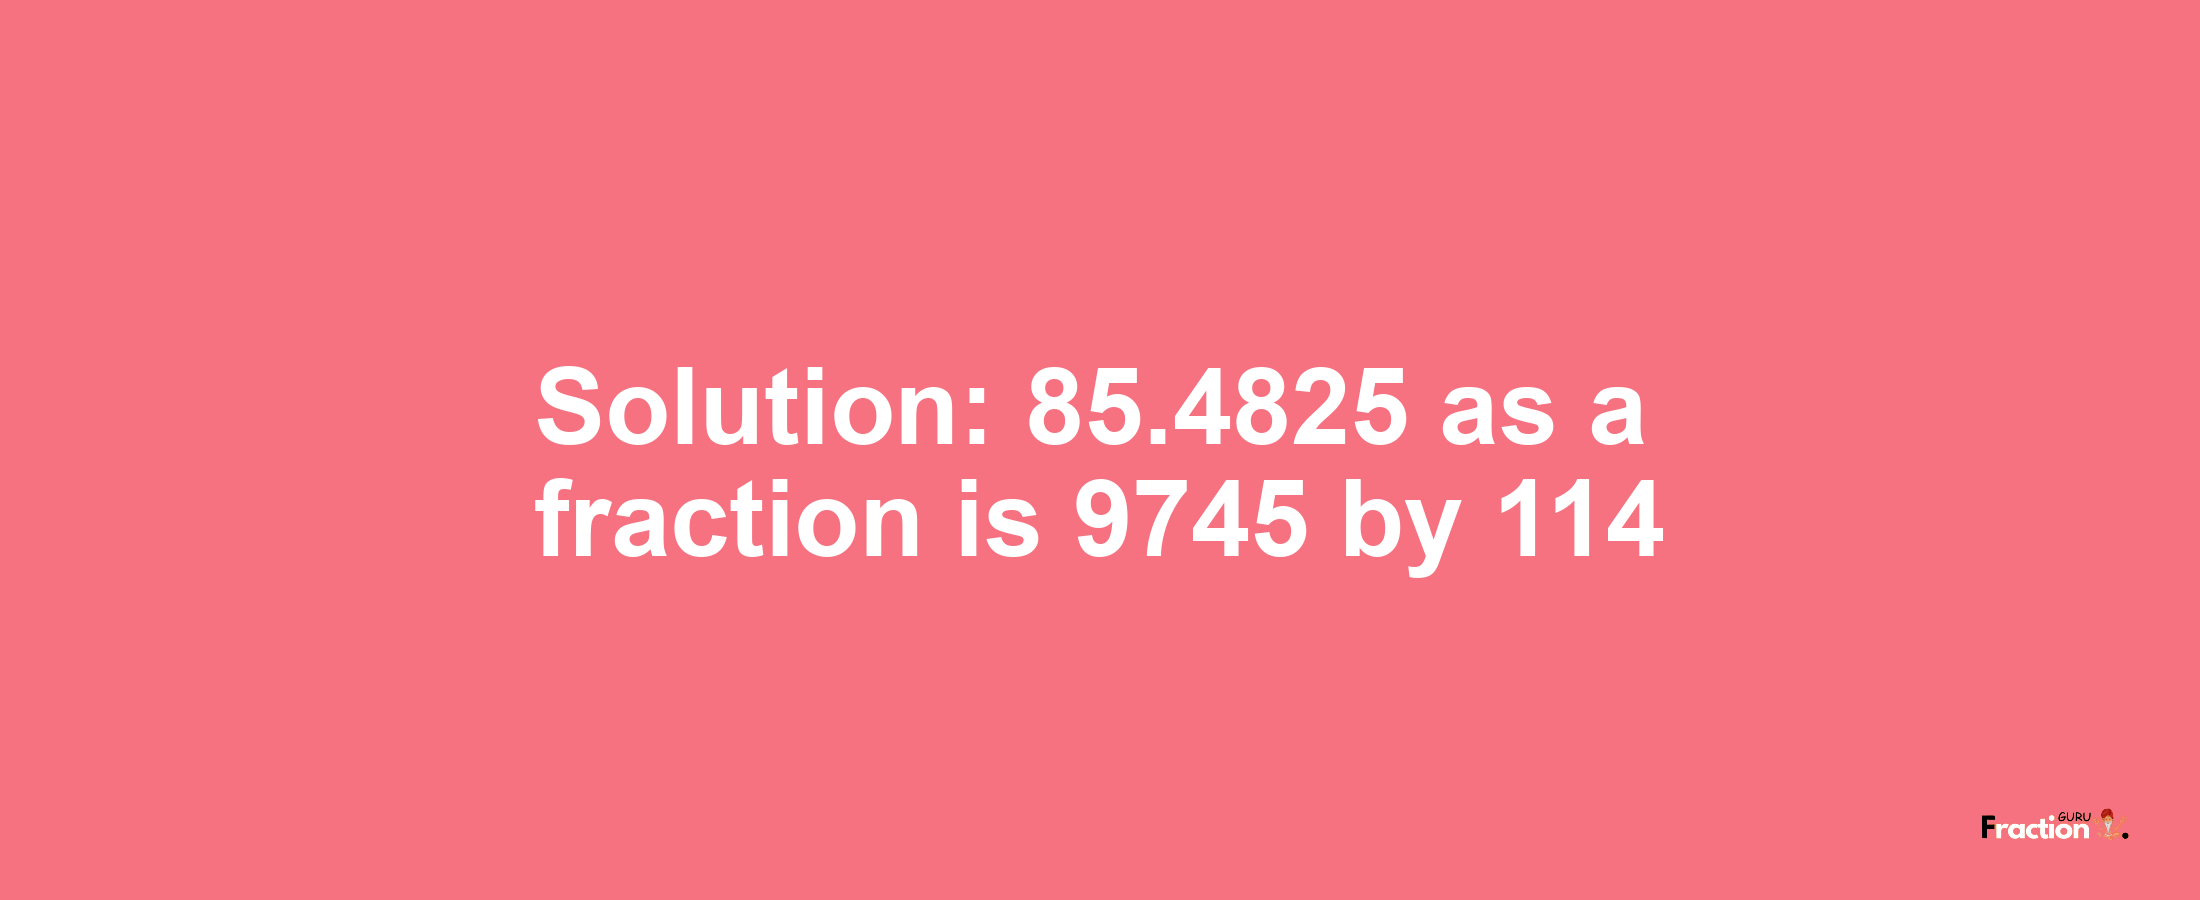 Solution:85.4825 as a fraction is 9745/114